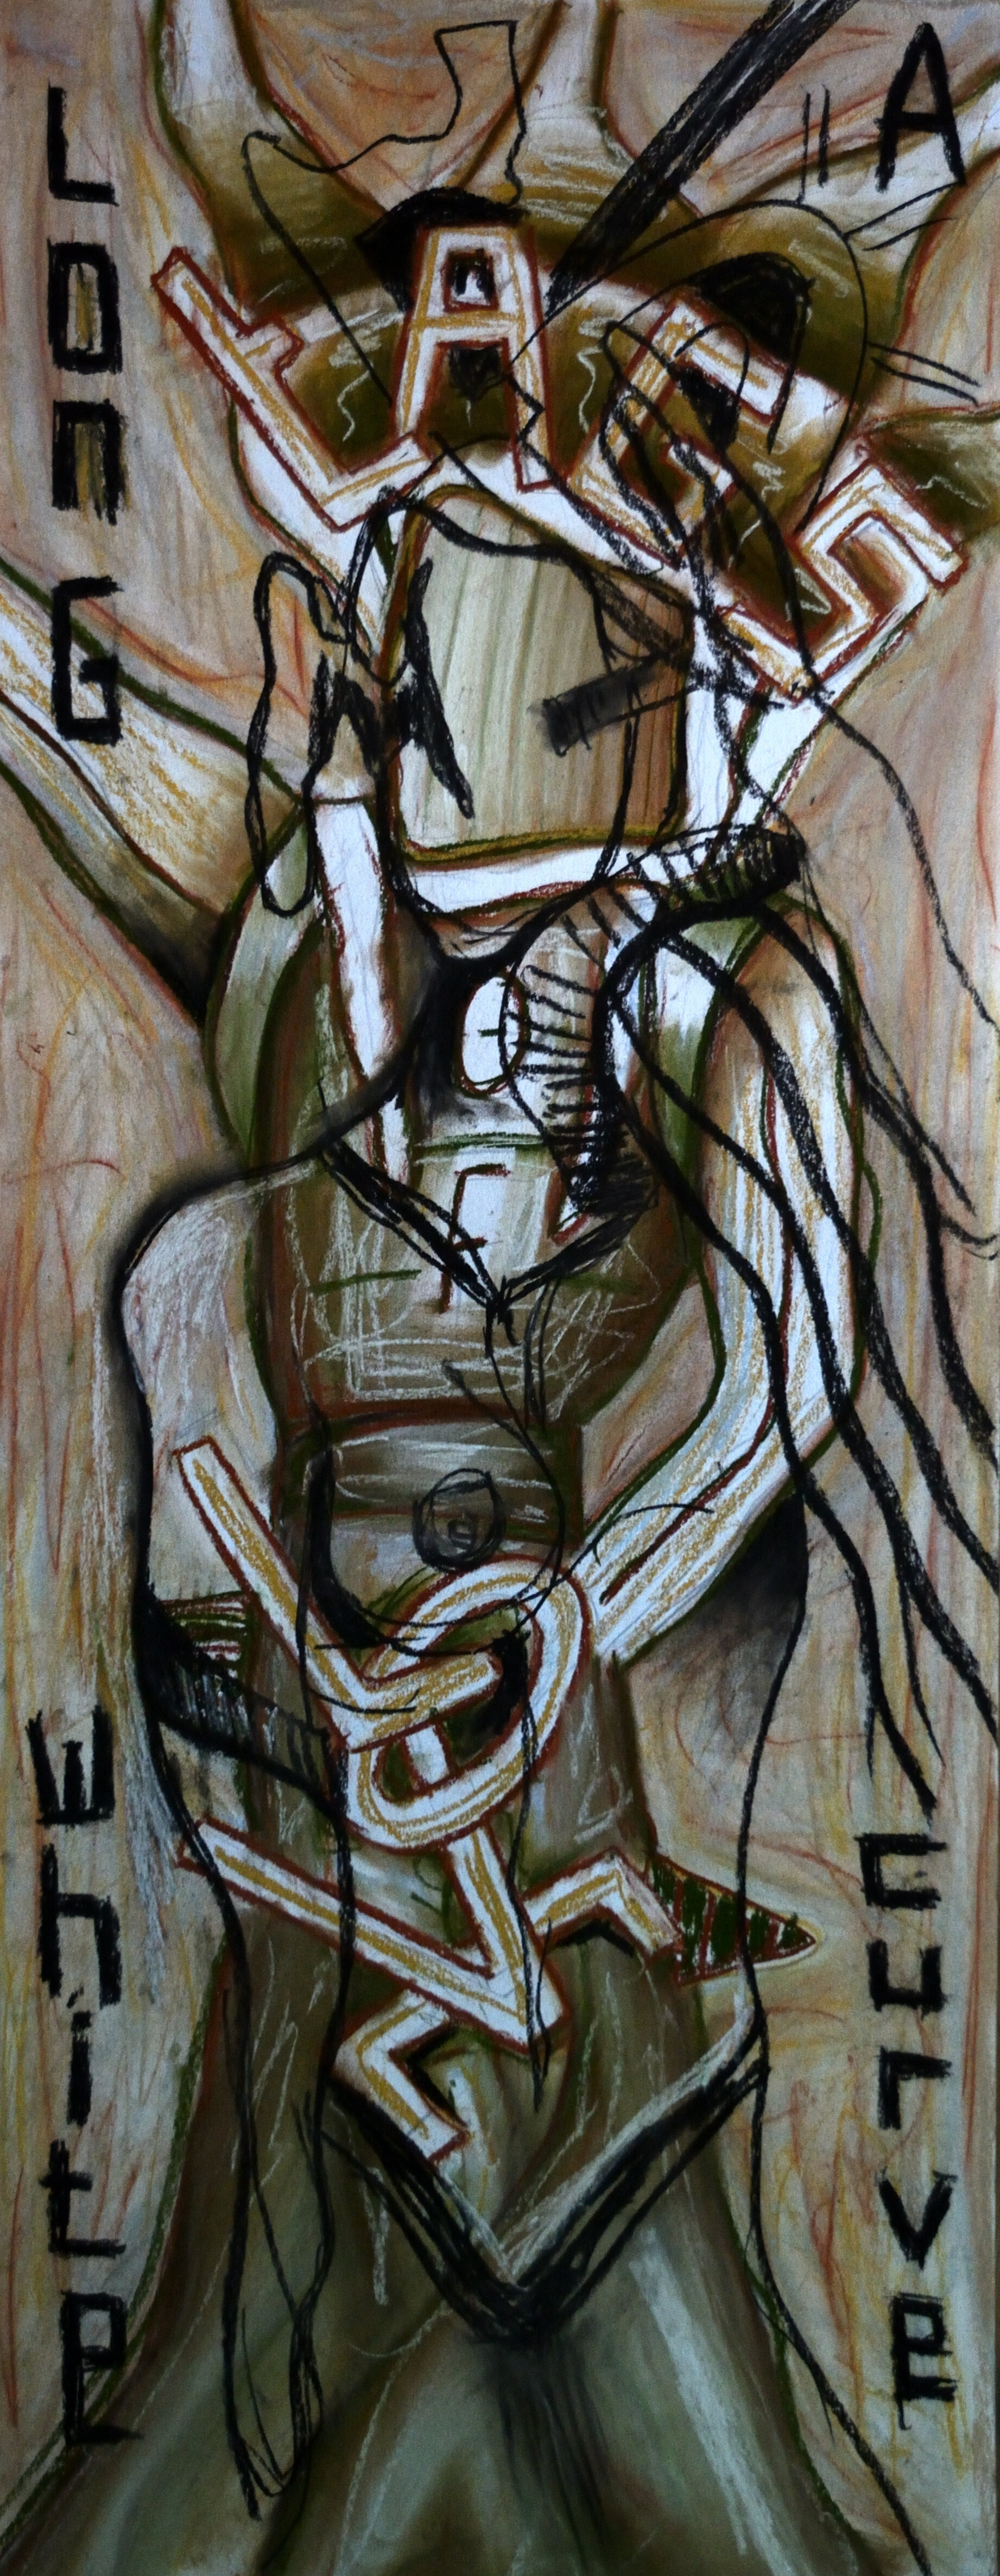 Tags of Love, A Long White Curve, pastel on paper, 140x55cm, 2020